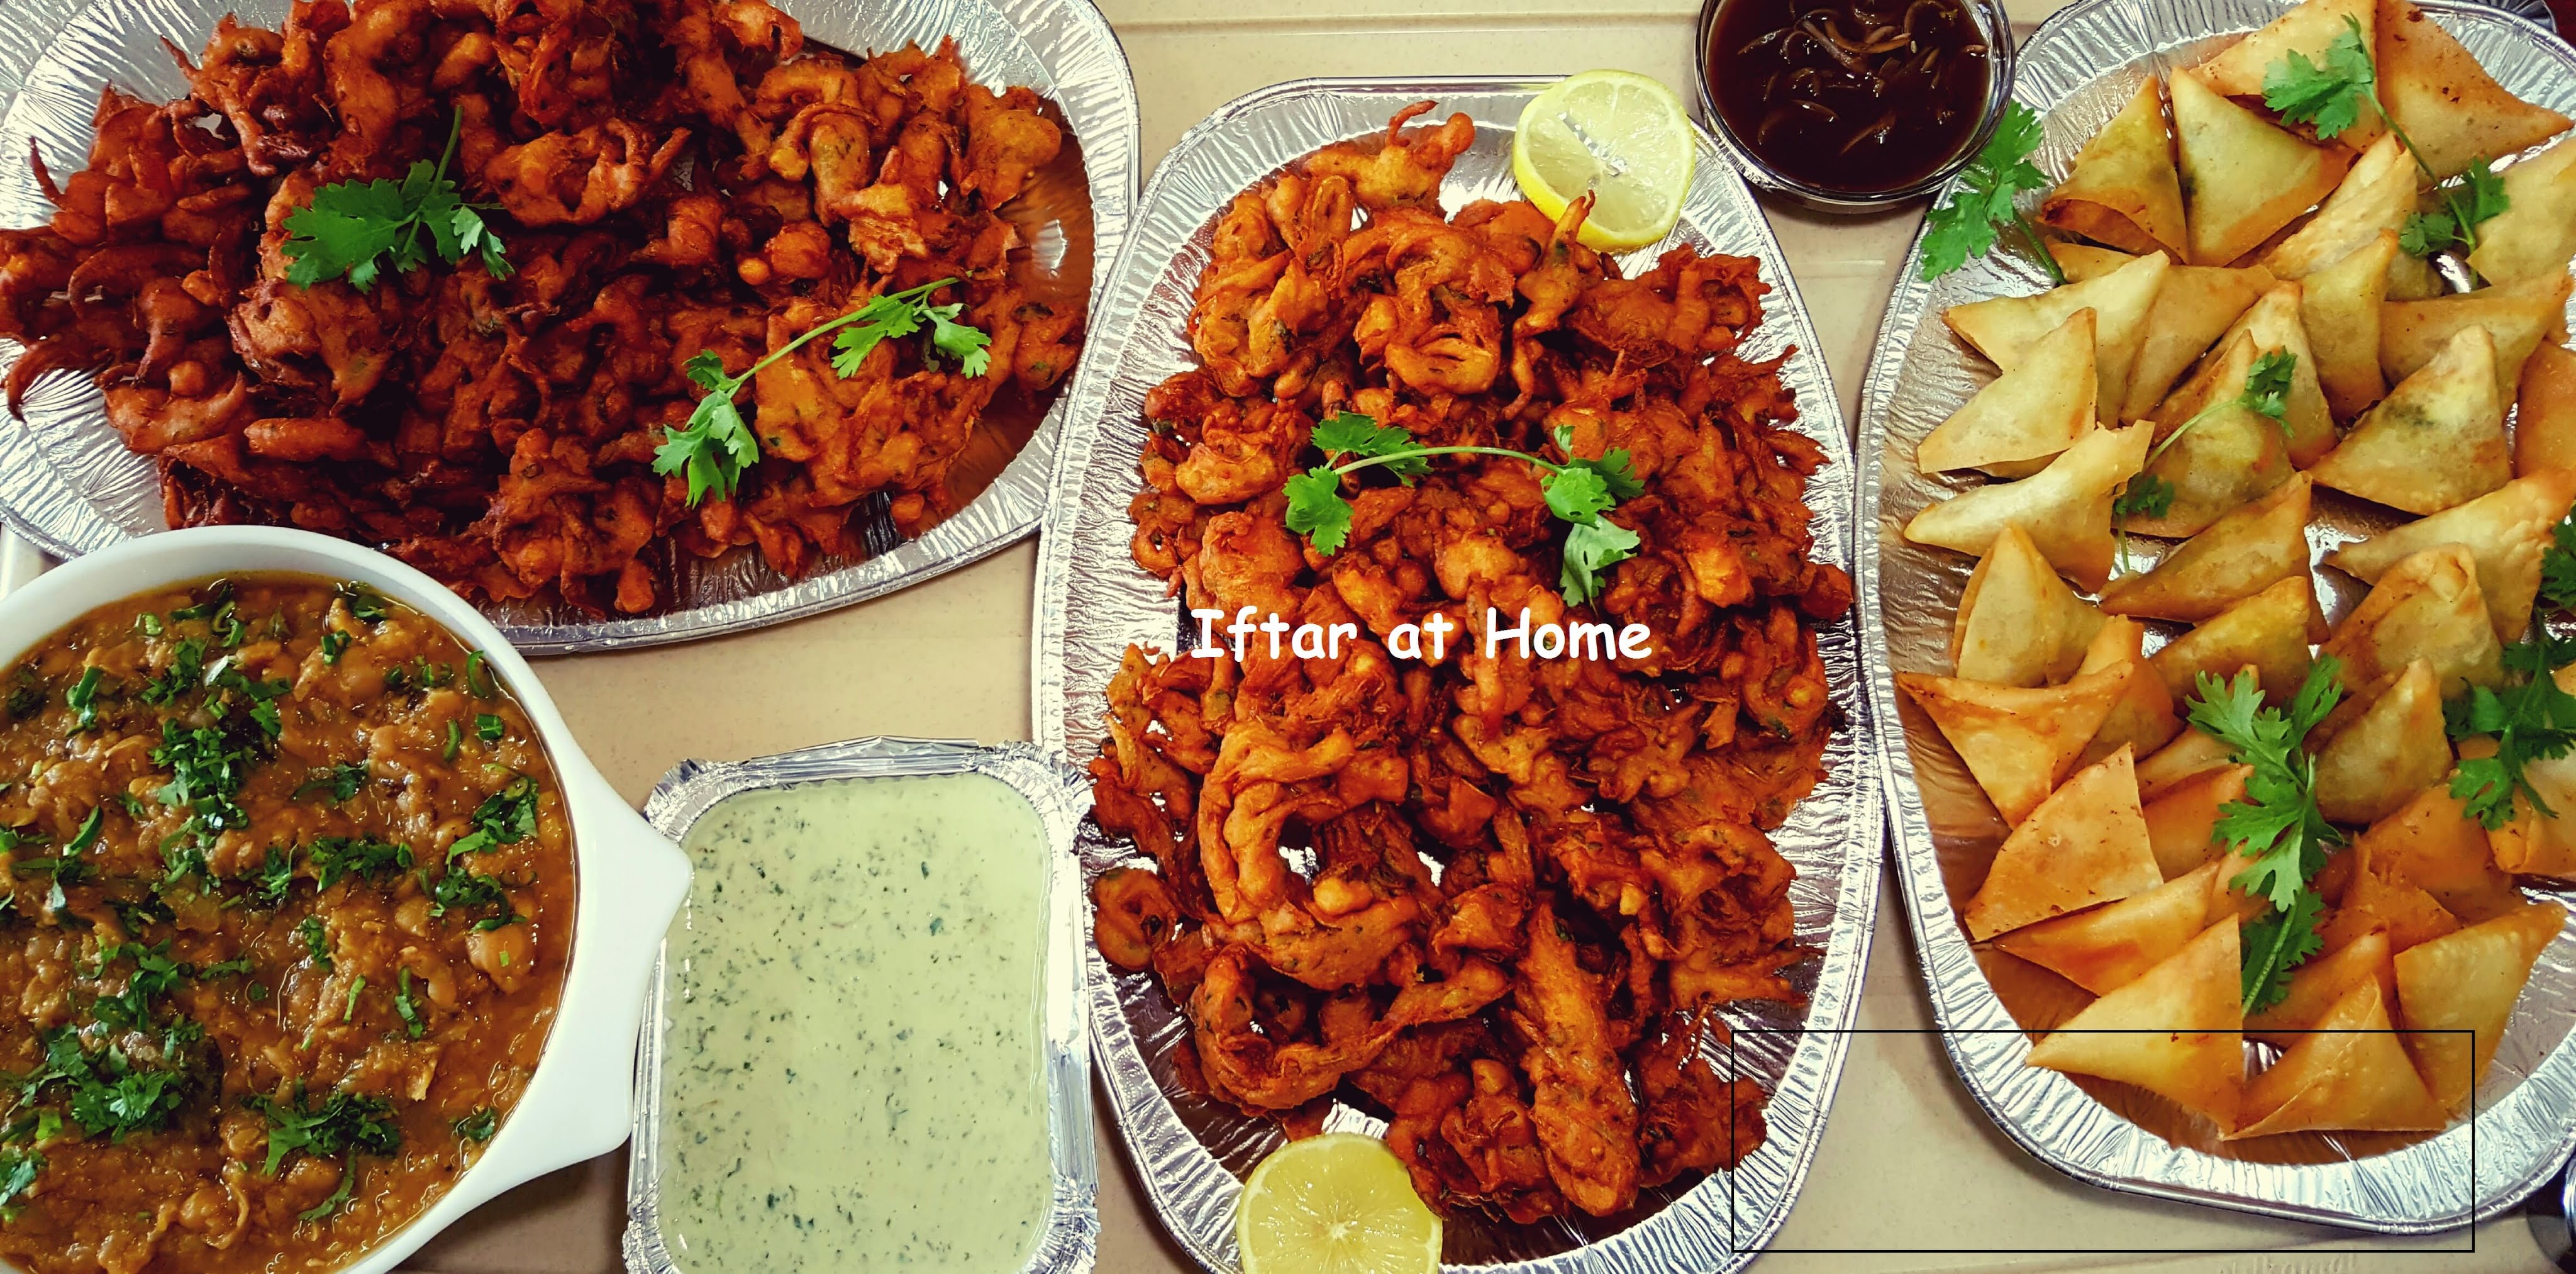 Iftar at Home with Family (Home Cooked Food & Snacks) Qatari Cuisine ...